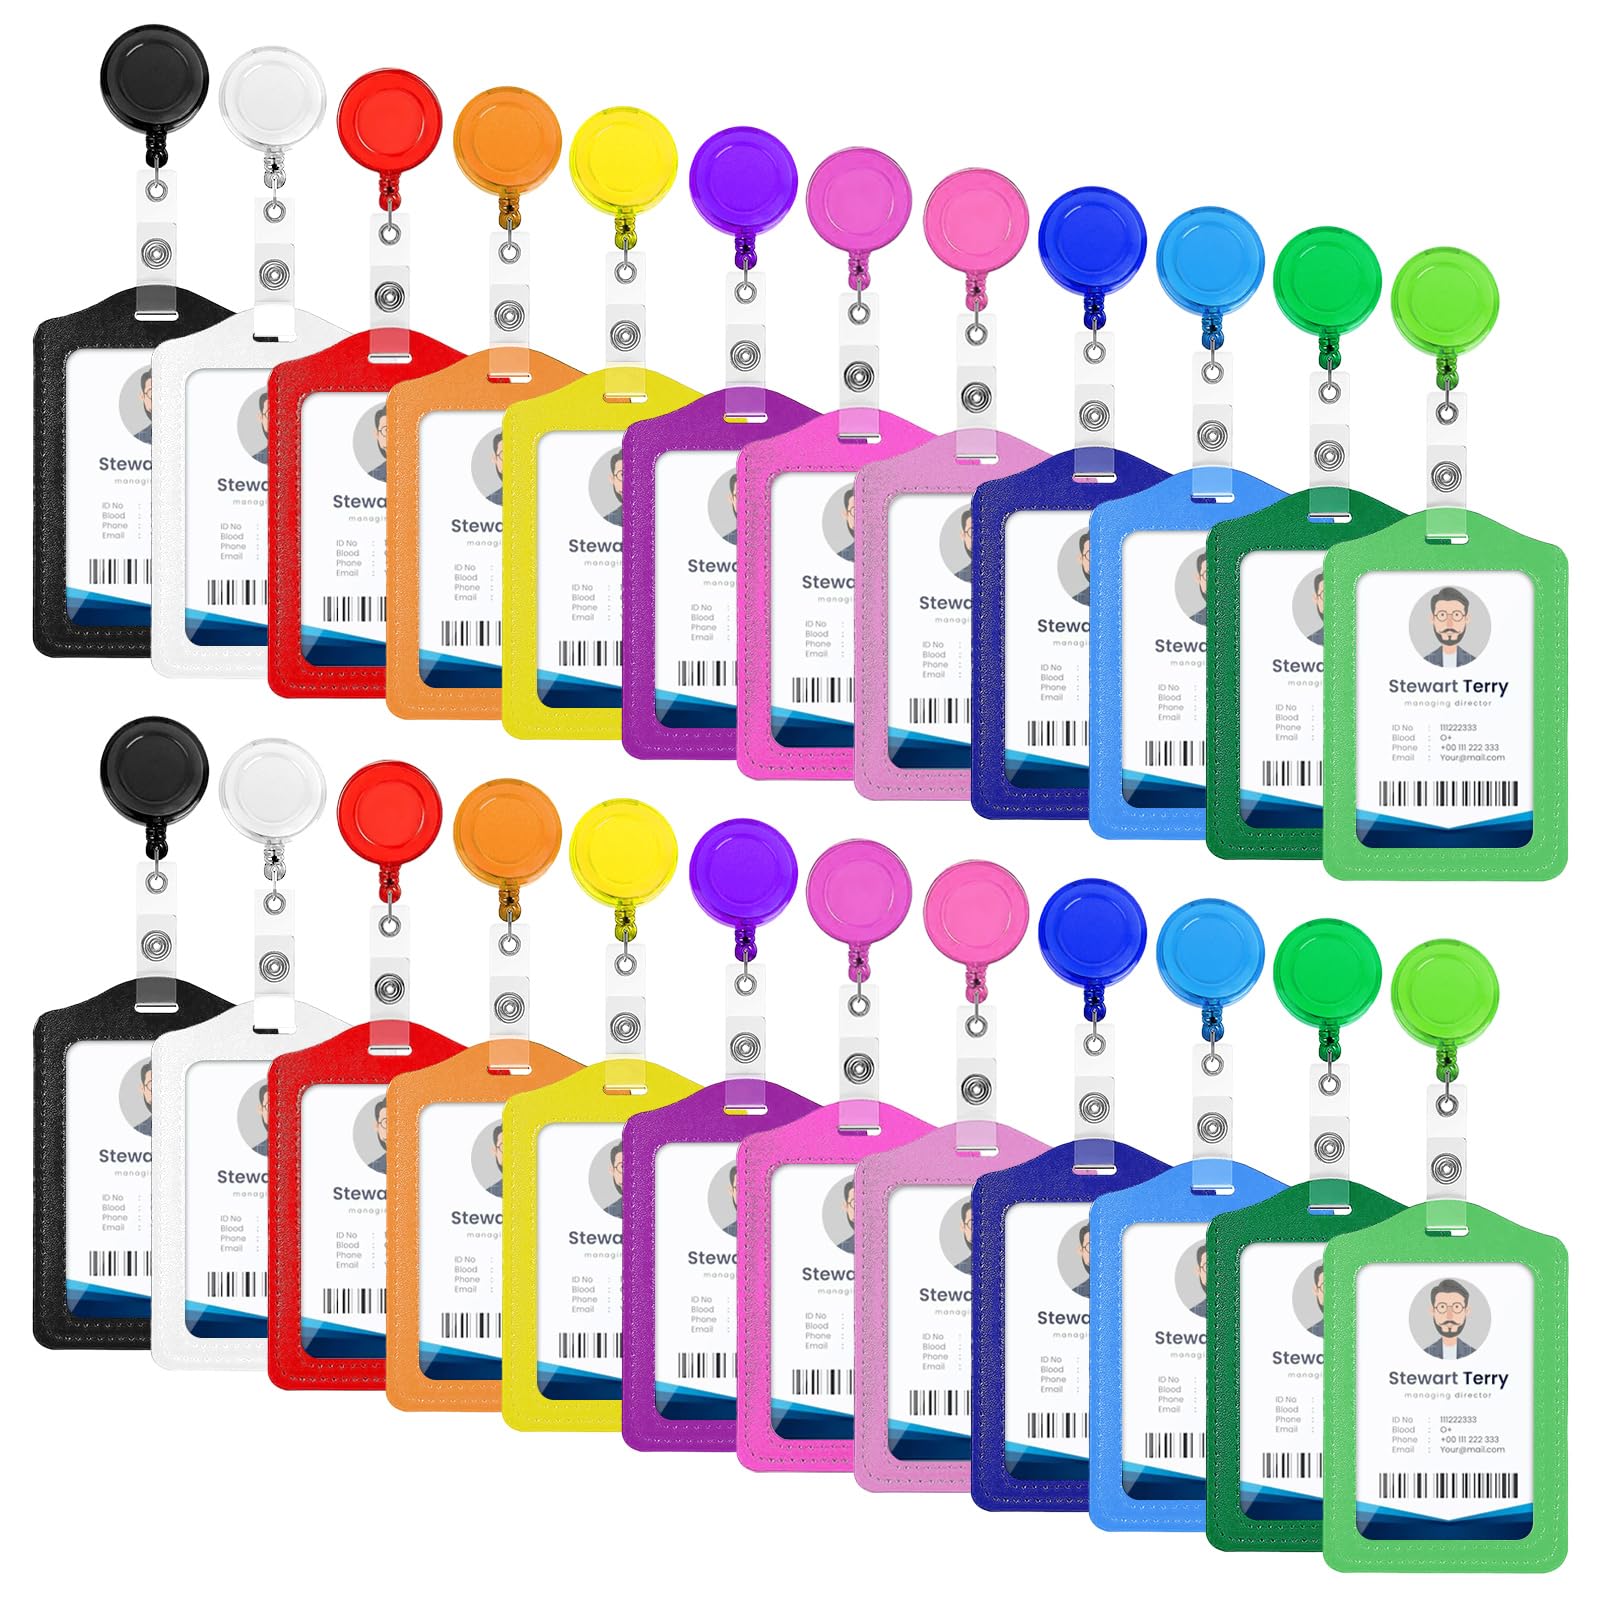 HIMOMO 24 Sets Card Badge Holder Retractable ID Holder Badge with Lanyards Multi-Color Name Badge Holder PU Leather Business ID Card Holder with Clip for Students Teachers Nurses Doctors (Vertical)